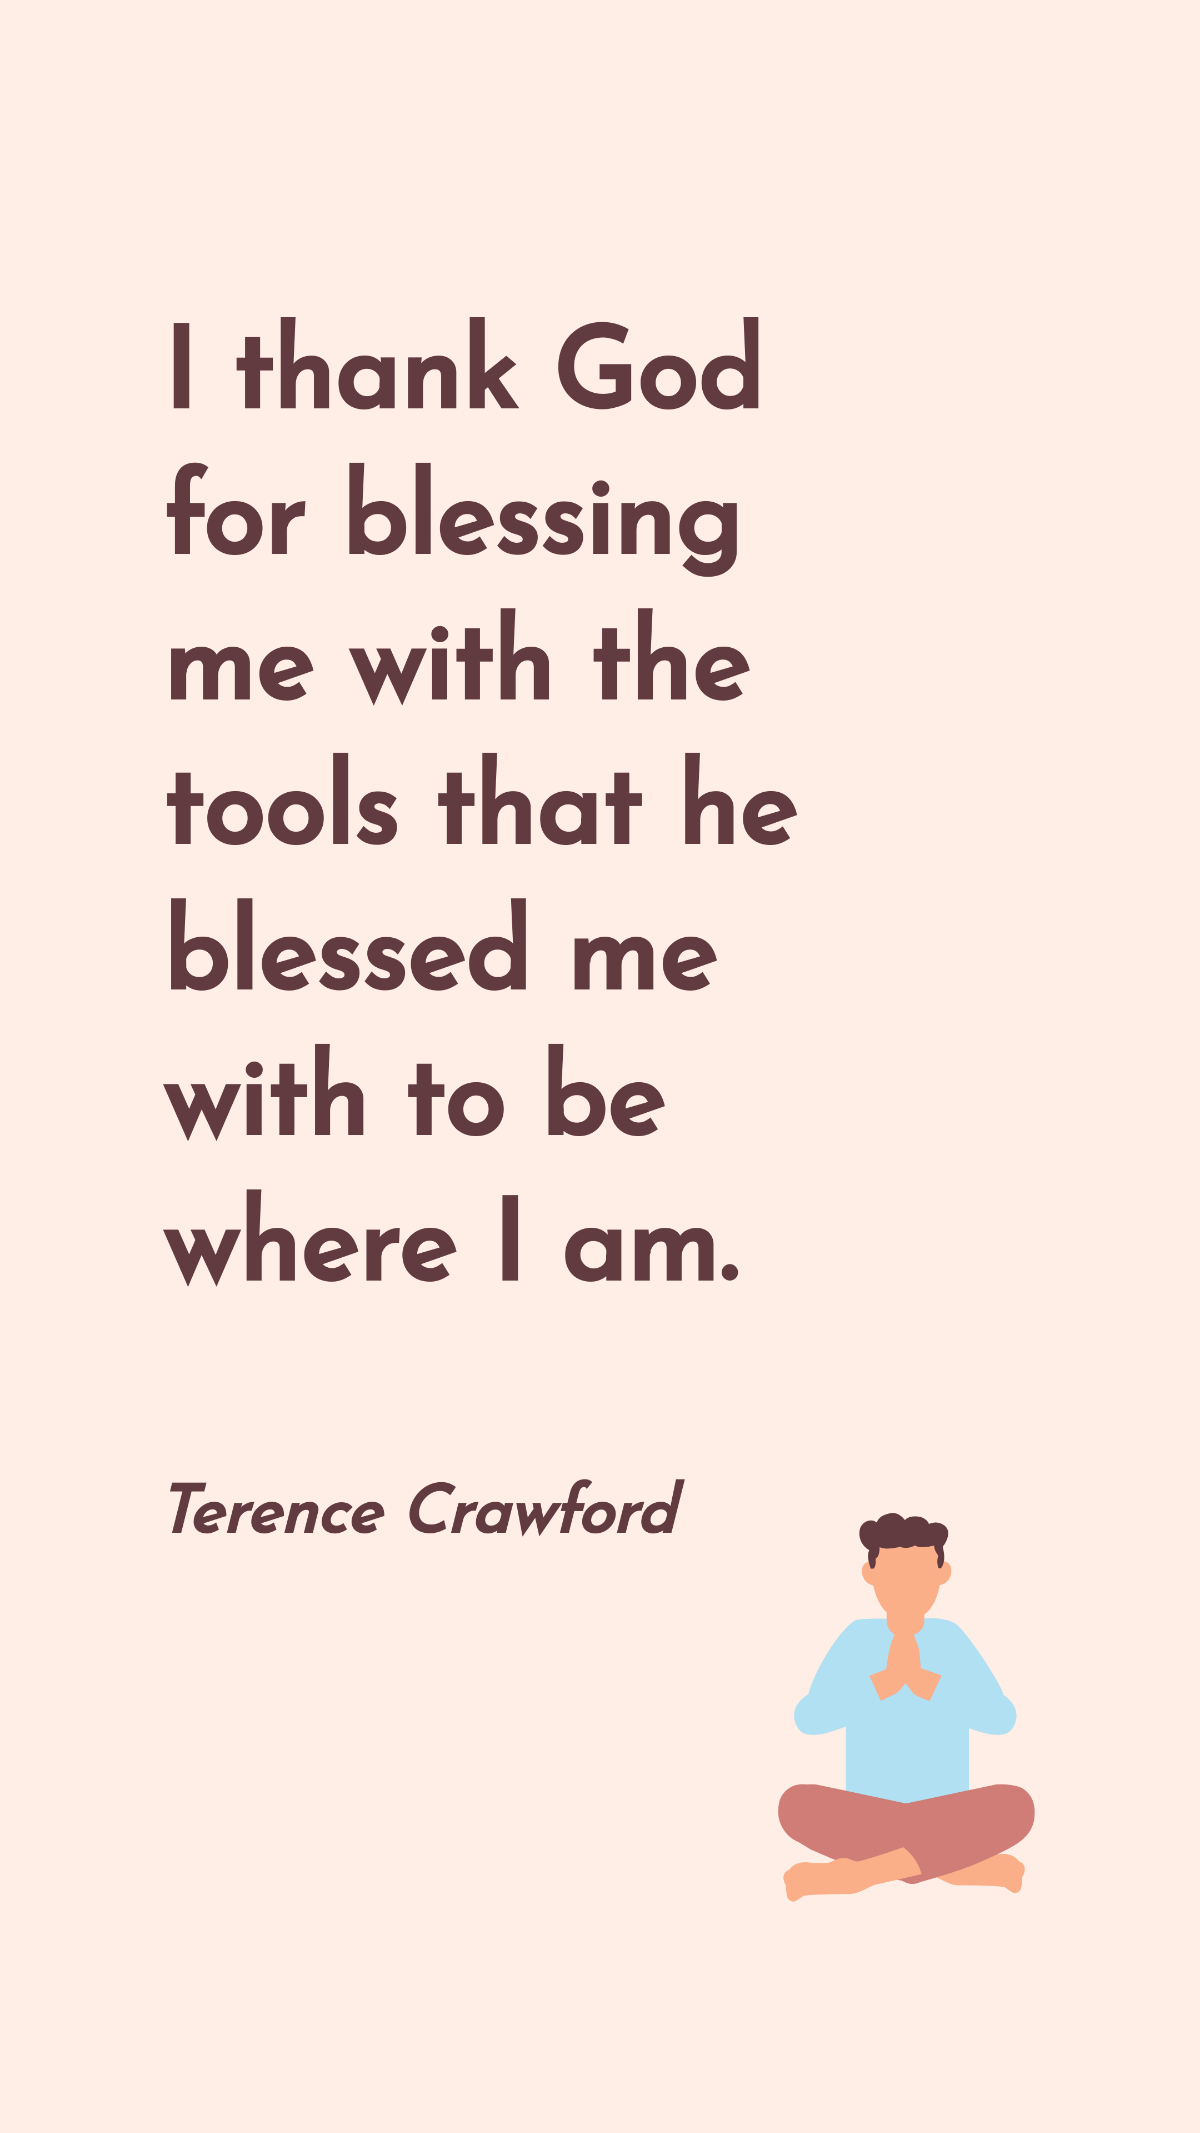 Terence Crawford - I thank God for blessing me with the tools that he blessed me with to be where I am. Template